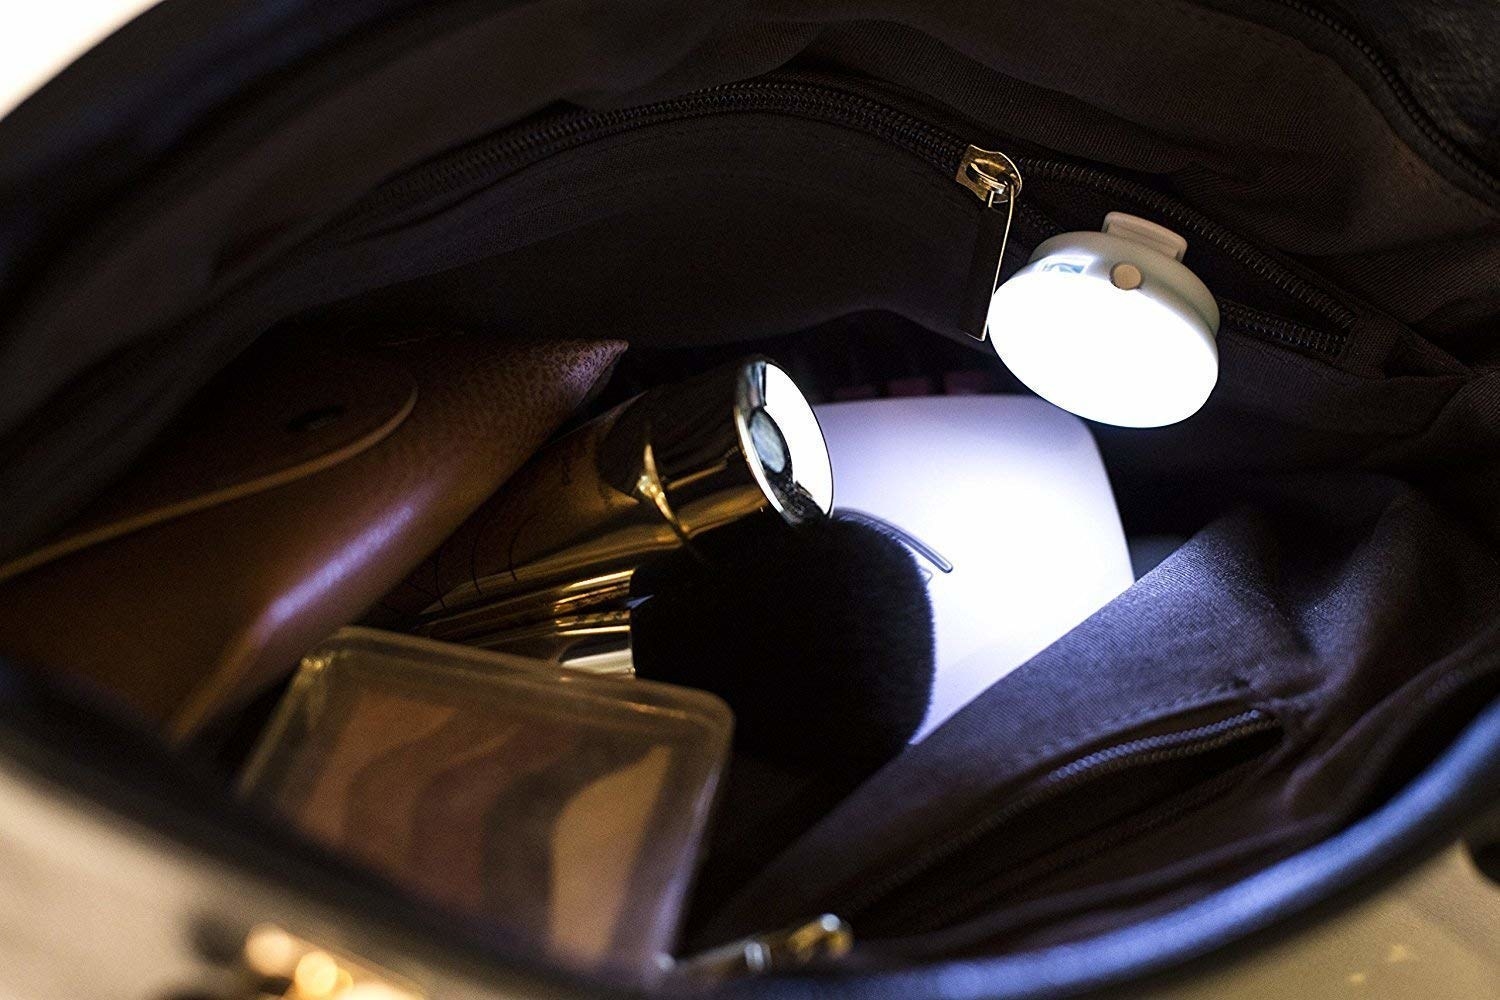 the light activated inside the purse showing the contents 